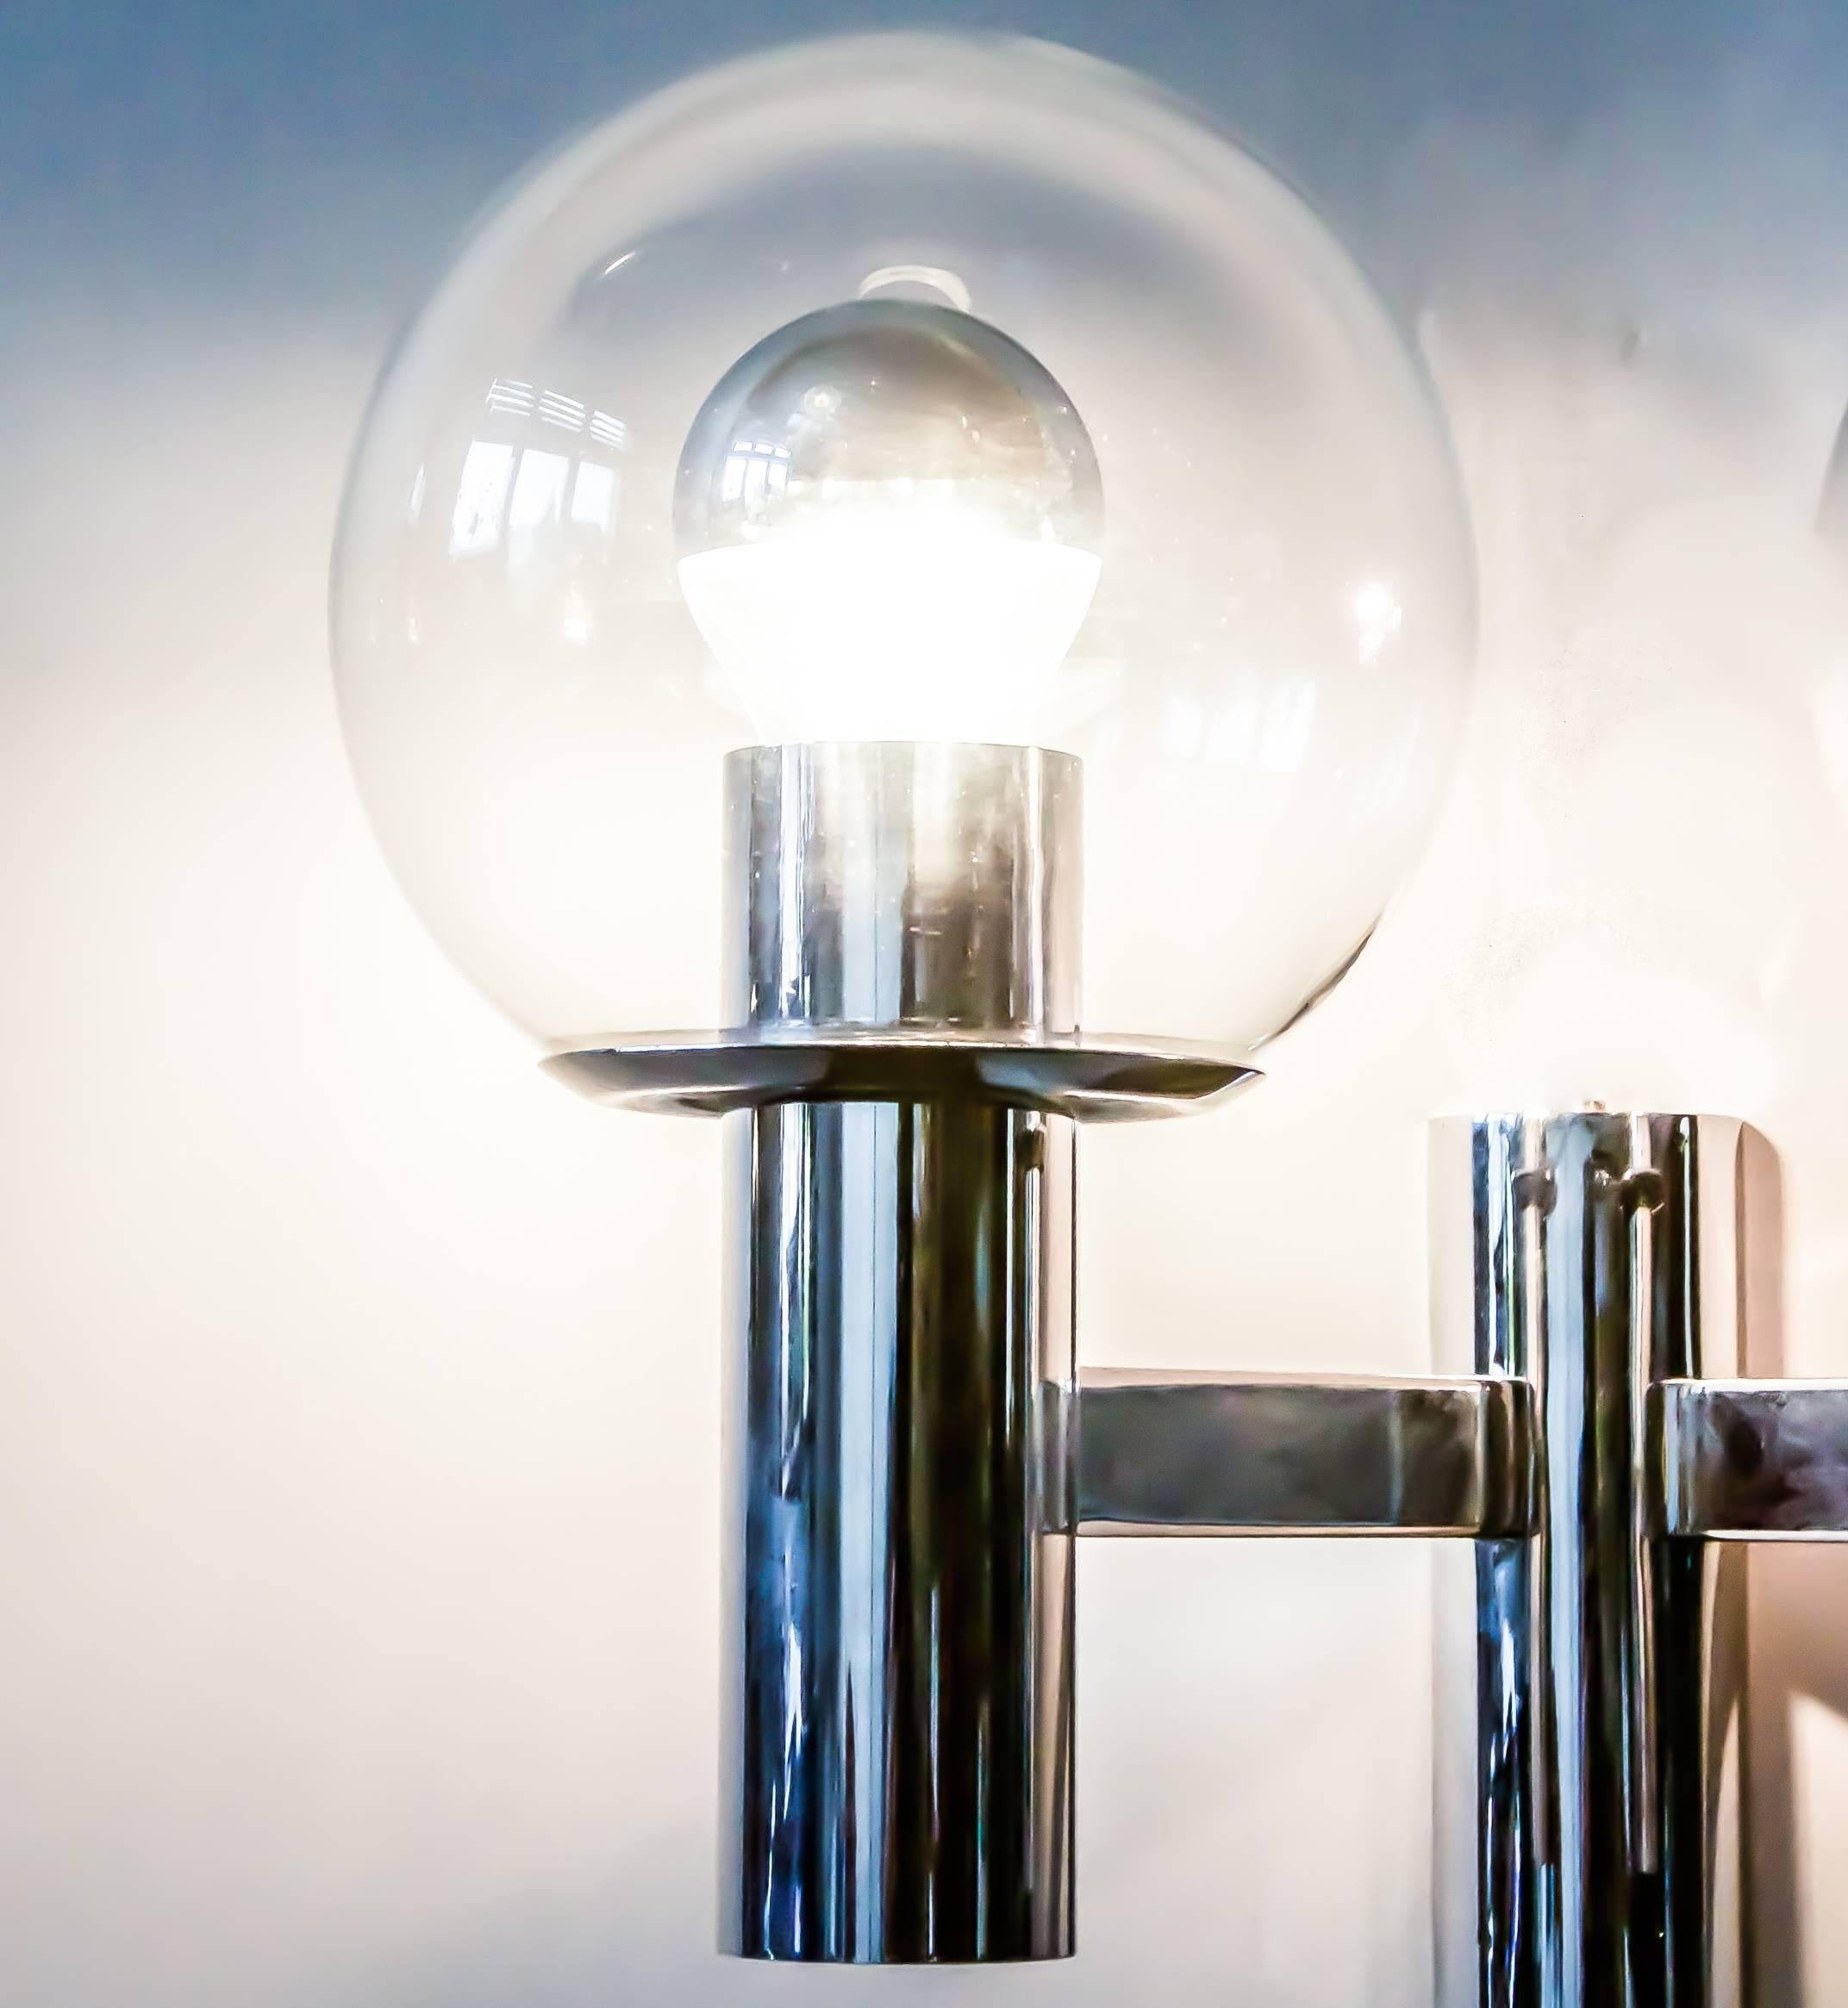 Pair (two) of chrome and glass wall light/sconces by Ott International Germany dedicated to Bauhaus


Pair of modern and plain chrome design sconces by Ott International, dedicated to the Bauhaus Period Germany.
The two blown glass globes are